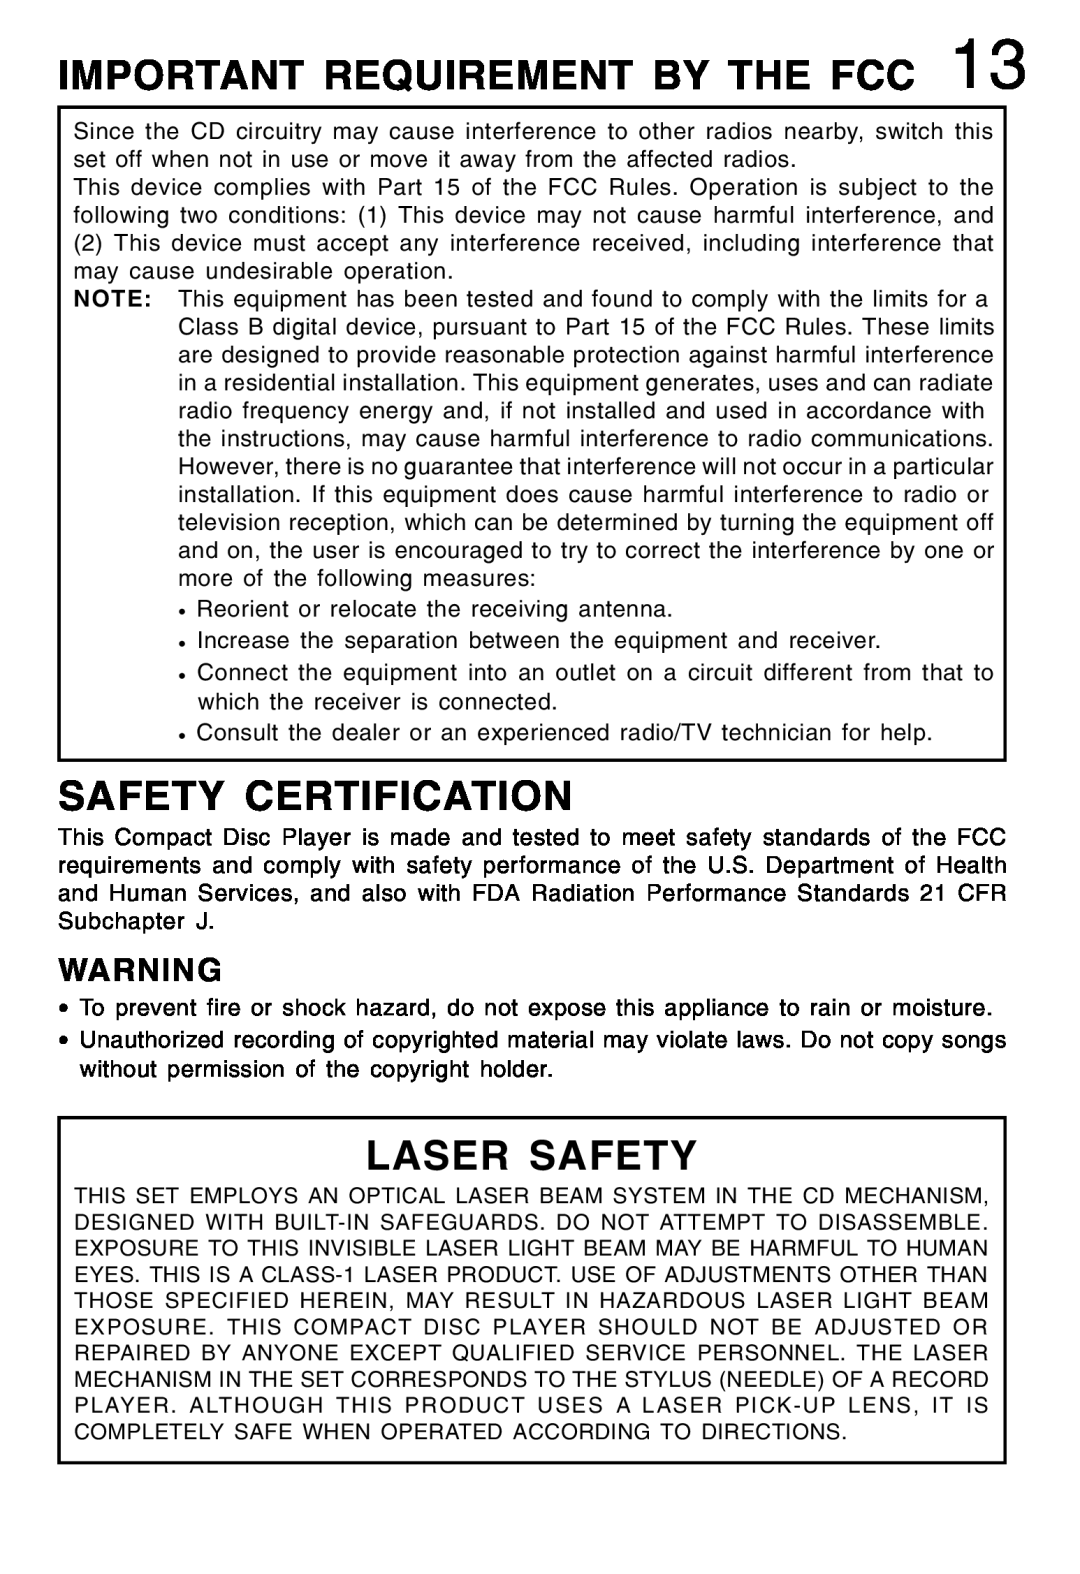 Lenoxx Electronics CD-79 operating instructions Important Requirement By The Fcc, Safety Certification, Laser Safety 